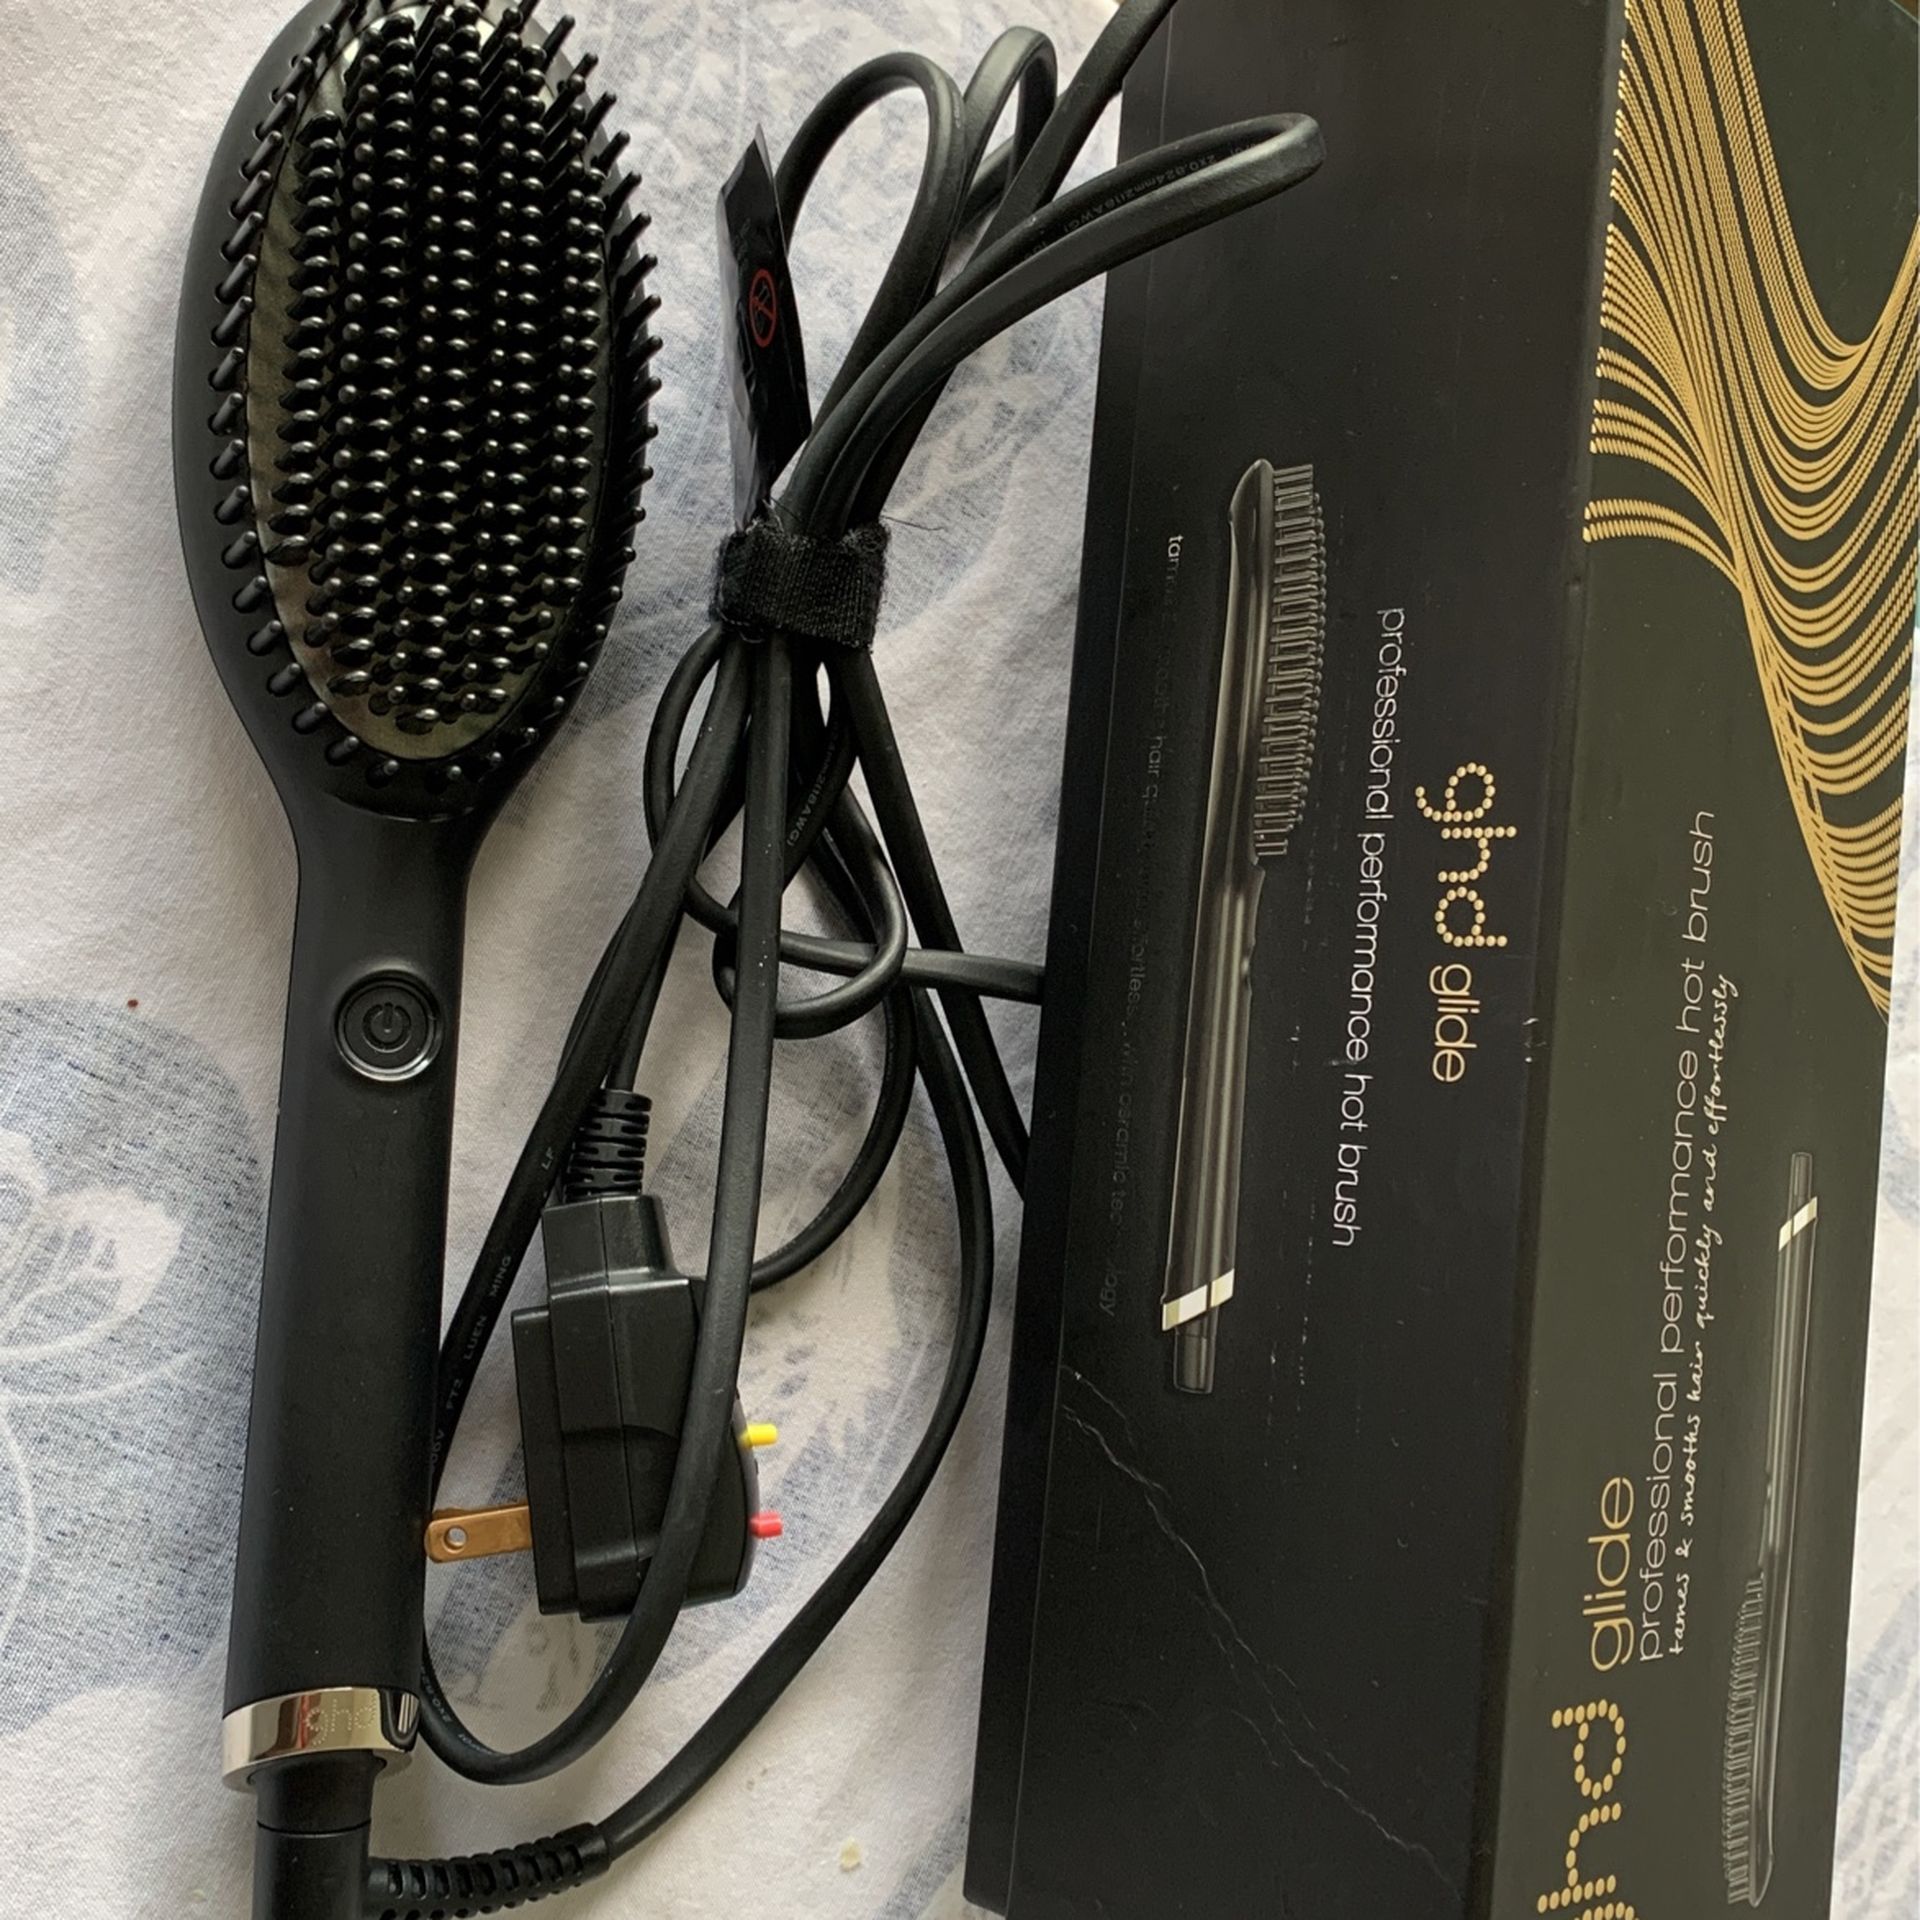 GHD Glide … (Excellent condition, gently used)